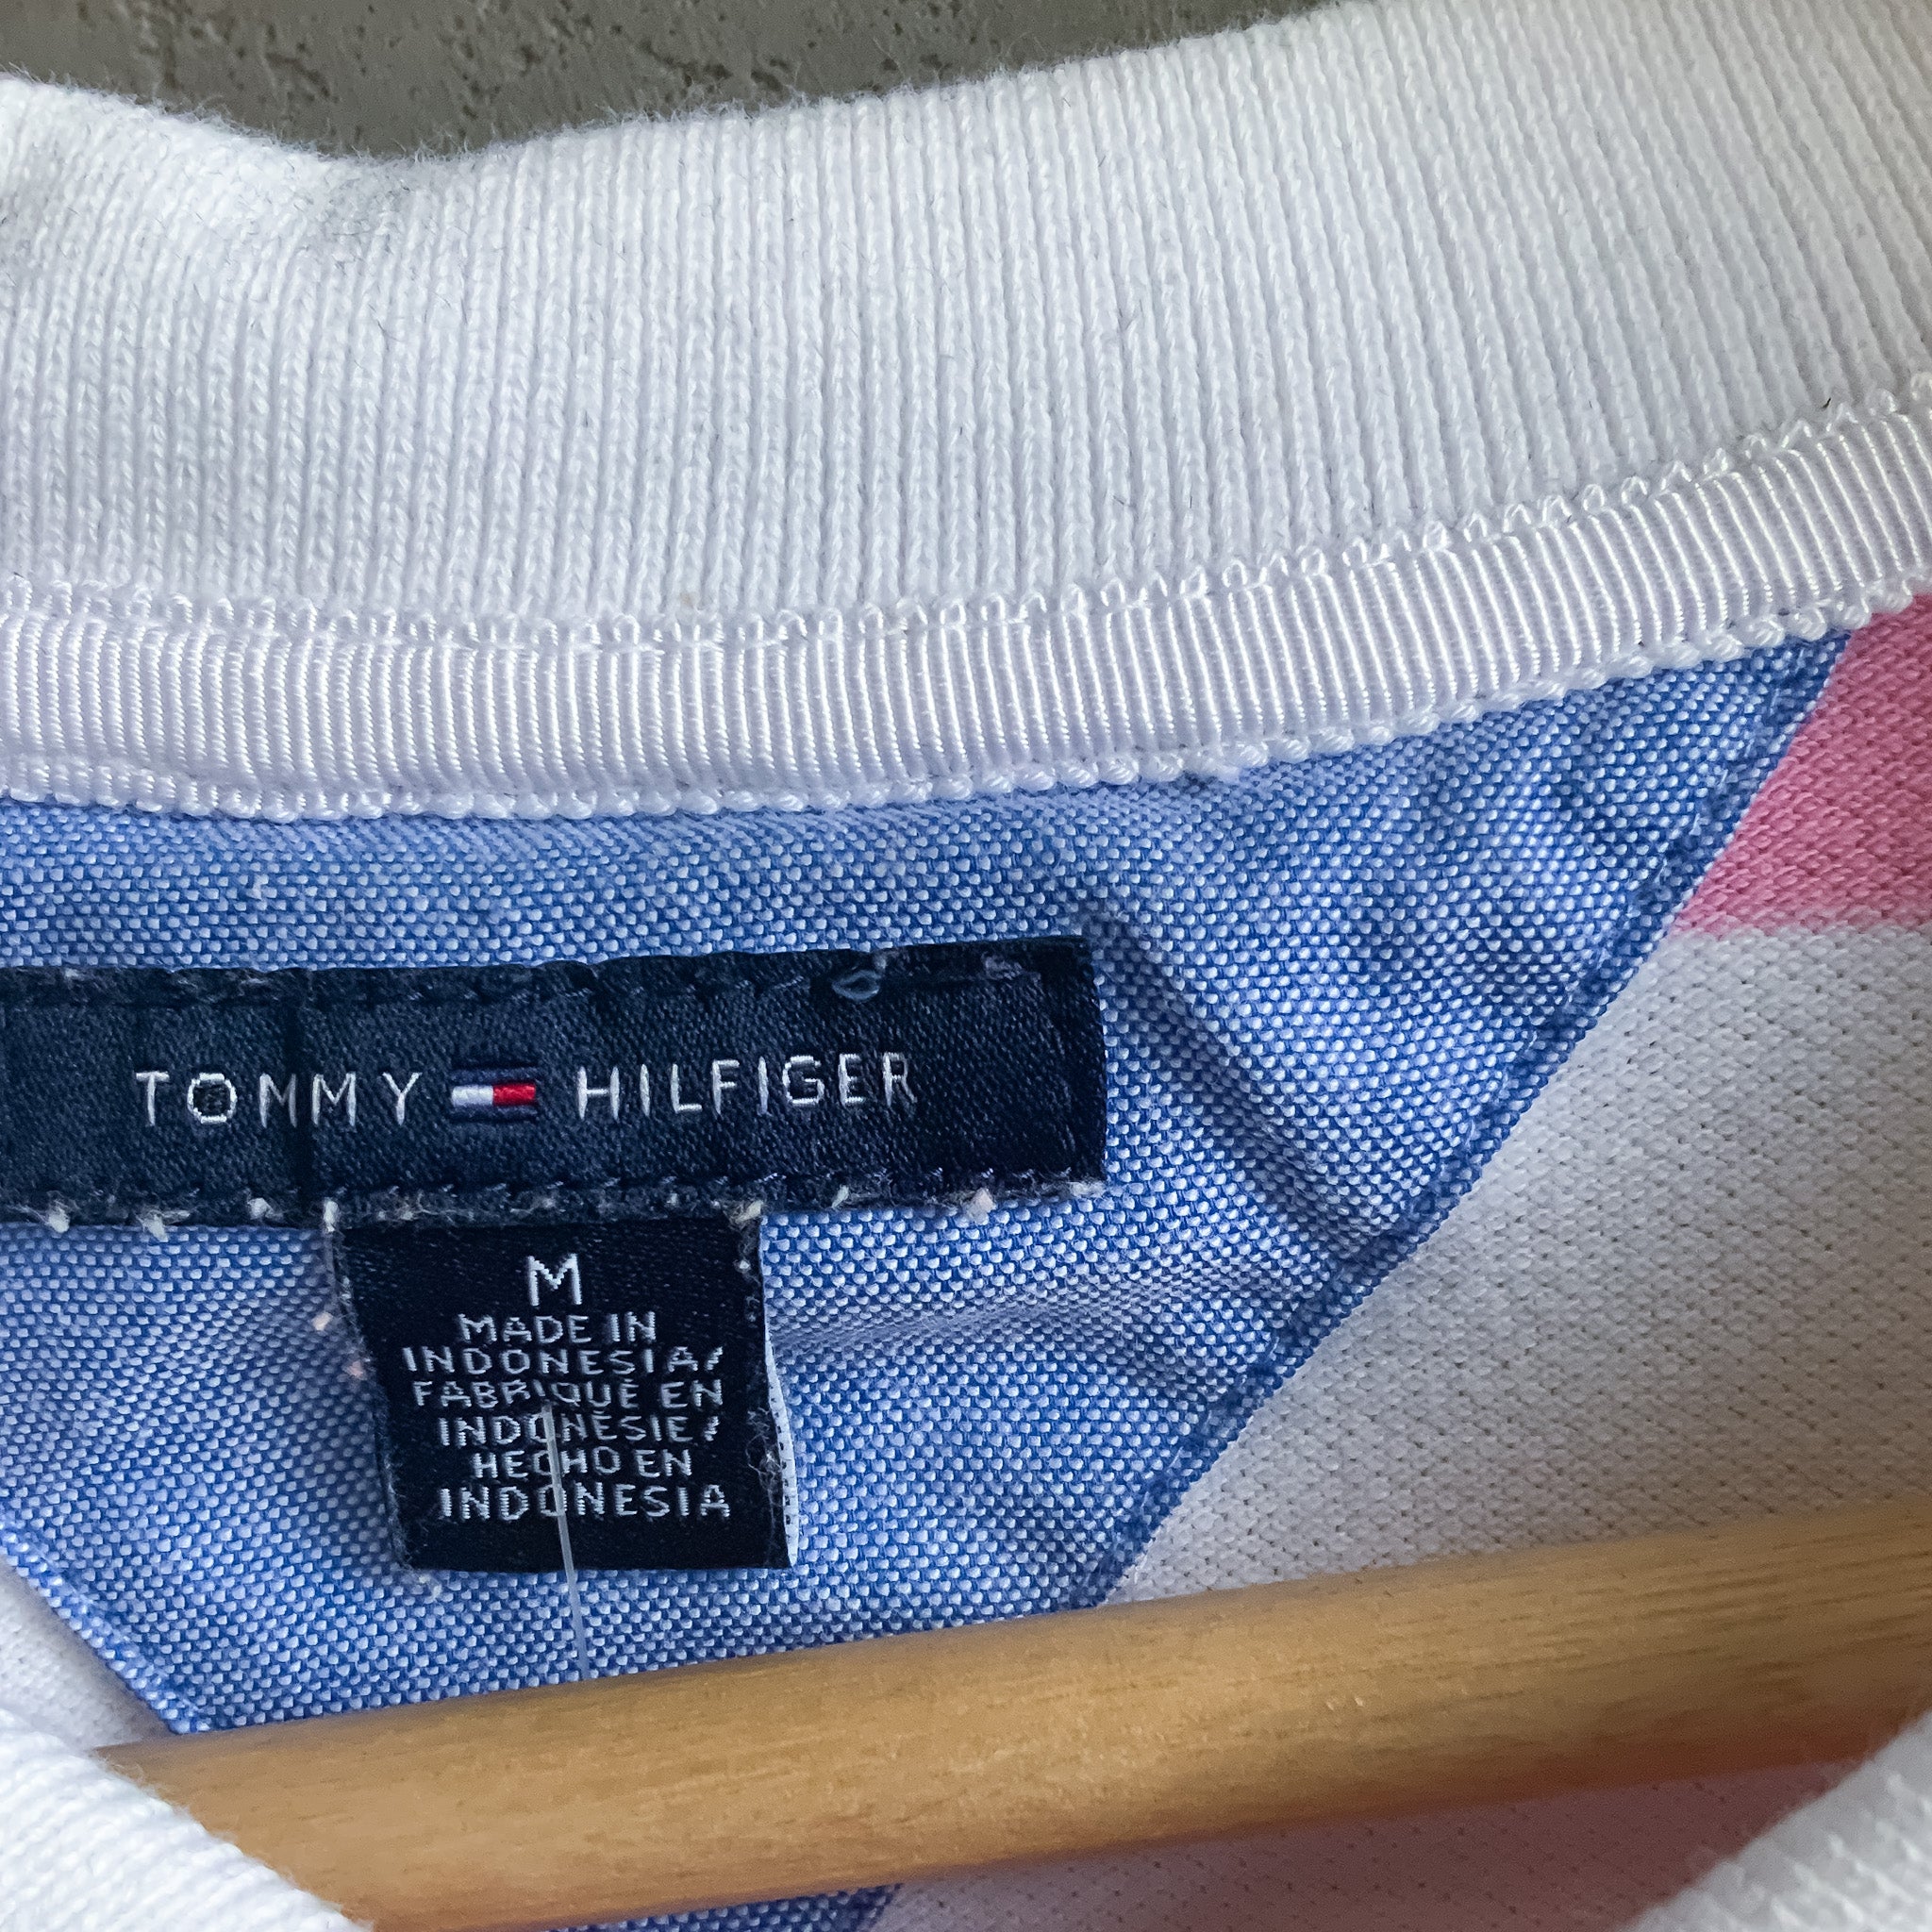 TOMMY HILFIGER Pink Striped Short Sleeve Polo Shirt - Size M